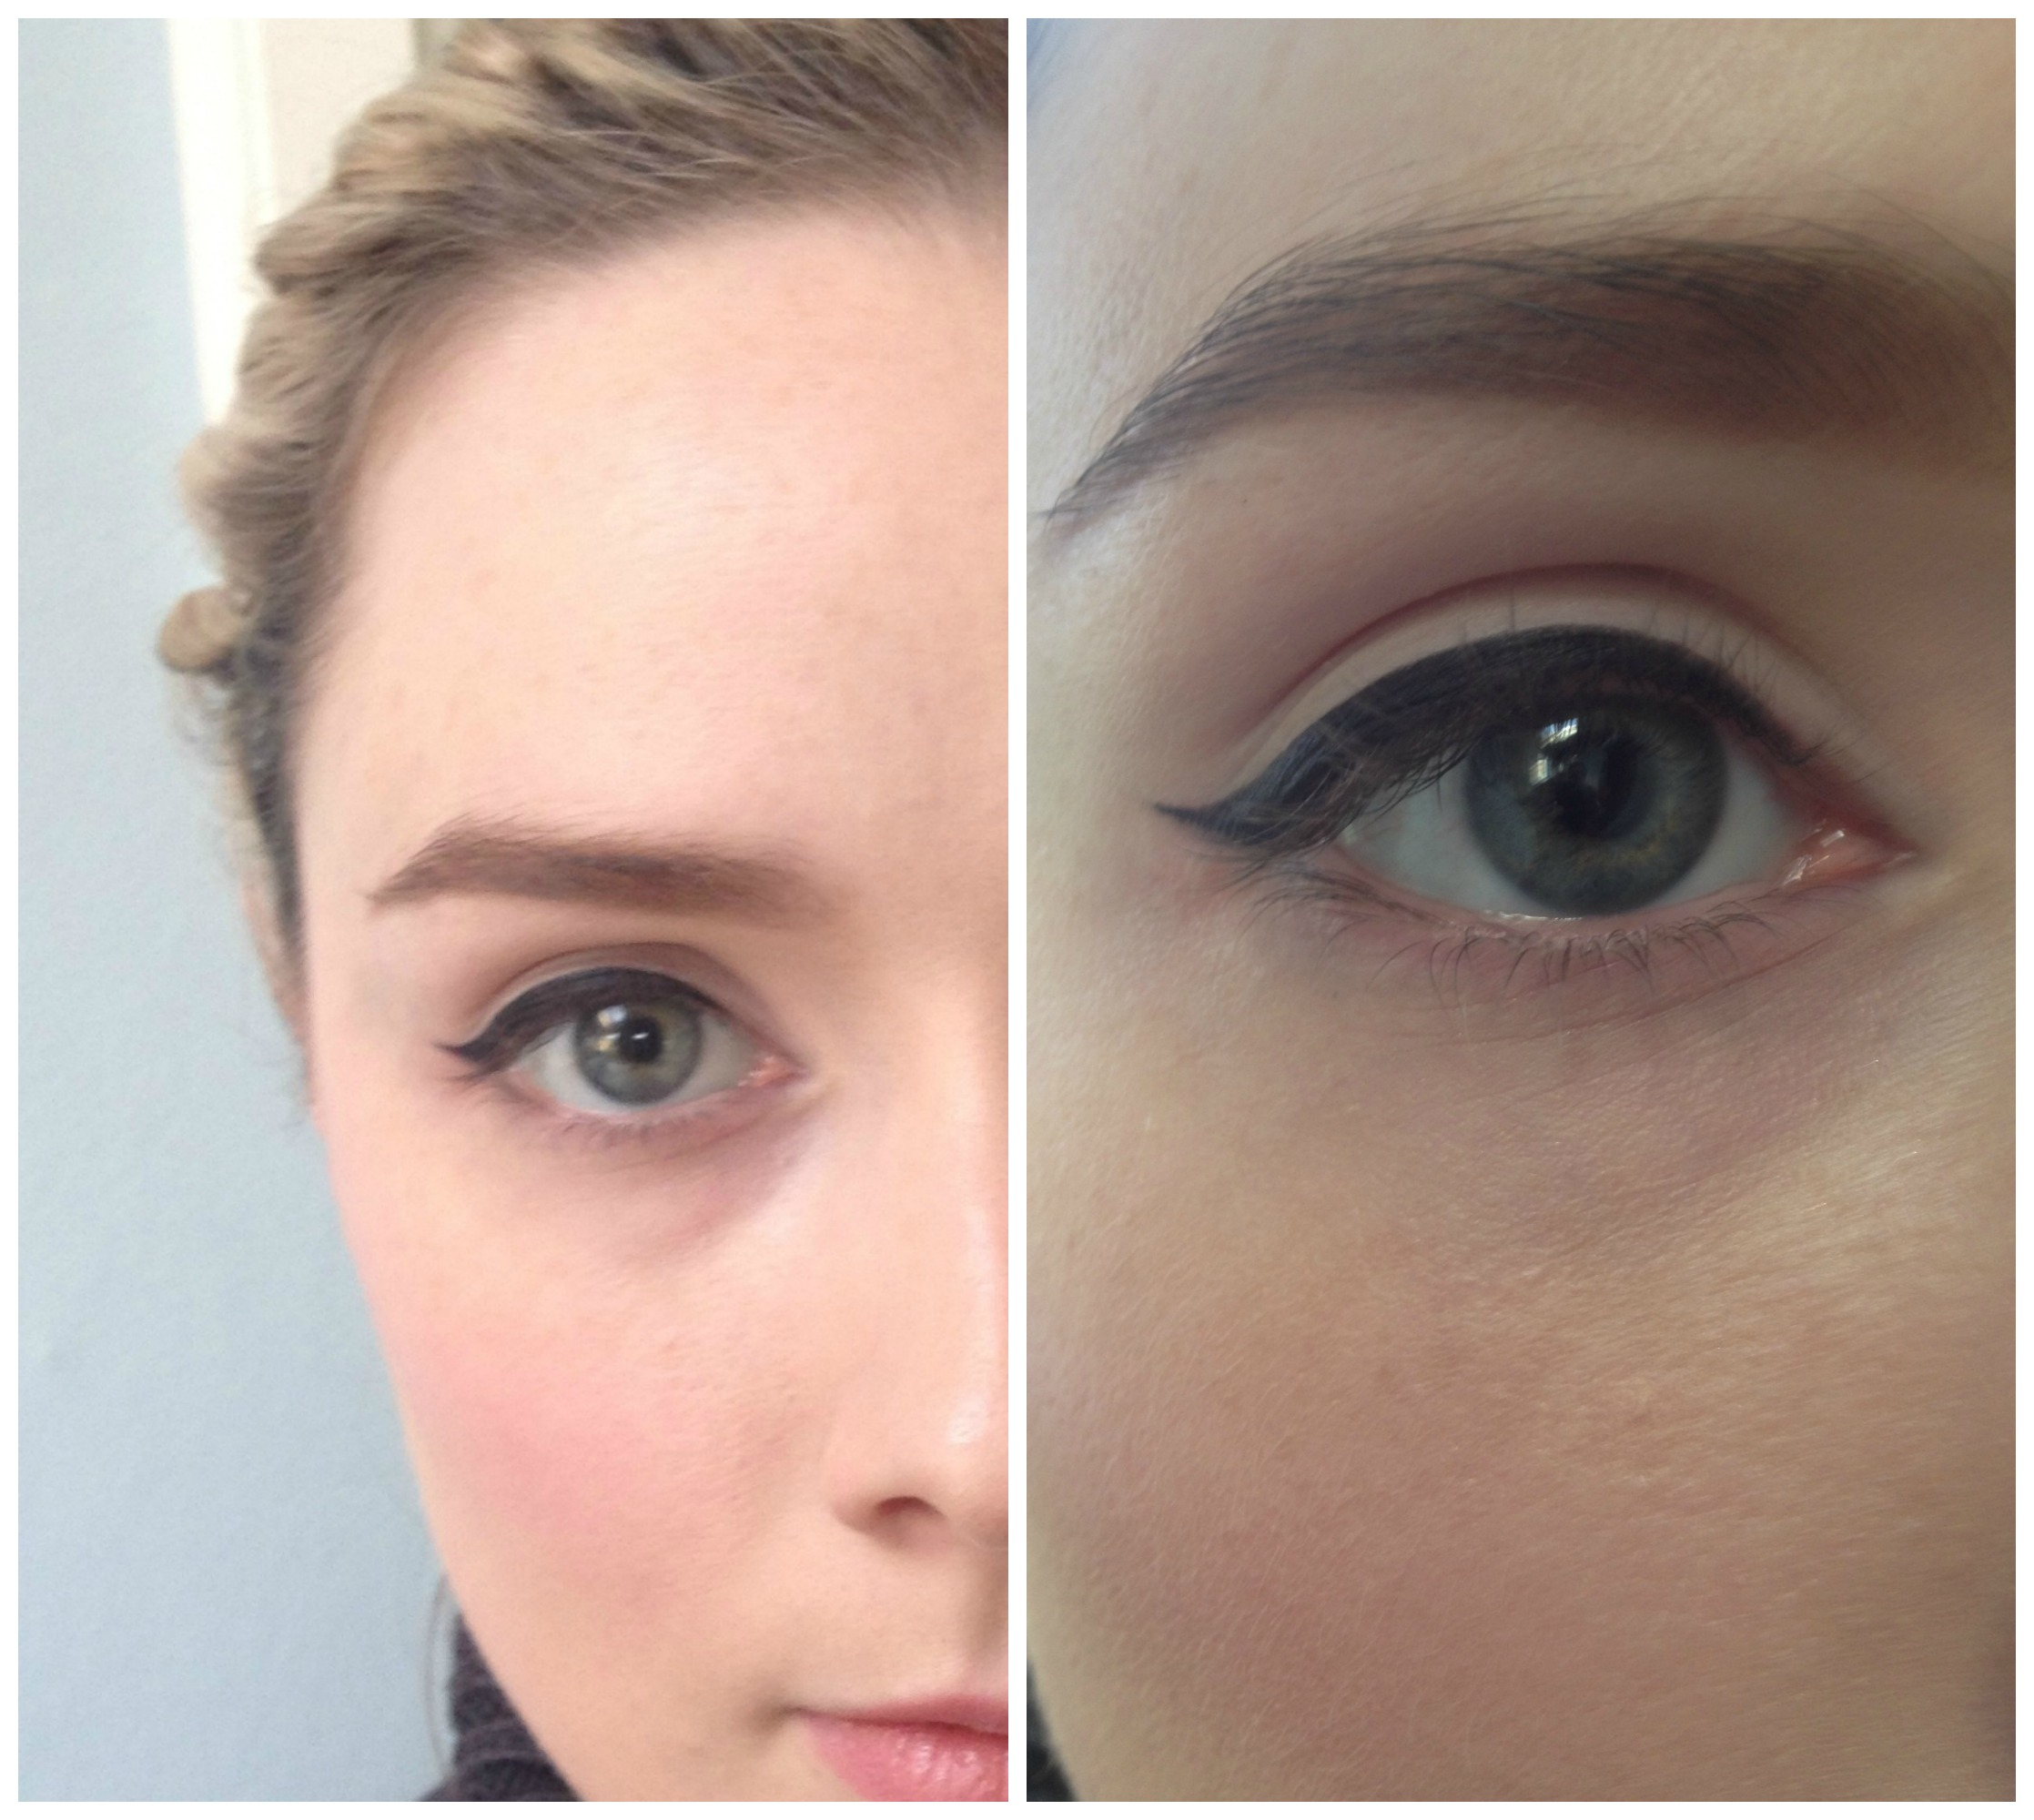 Makeup To Elongate Eyes Surgical Makeup How To Adjust Your Eye Shape To Suit Your Mood With